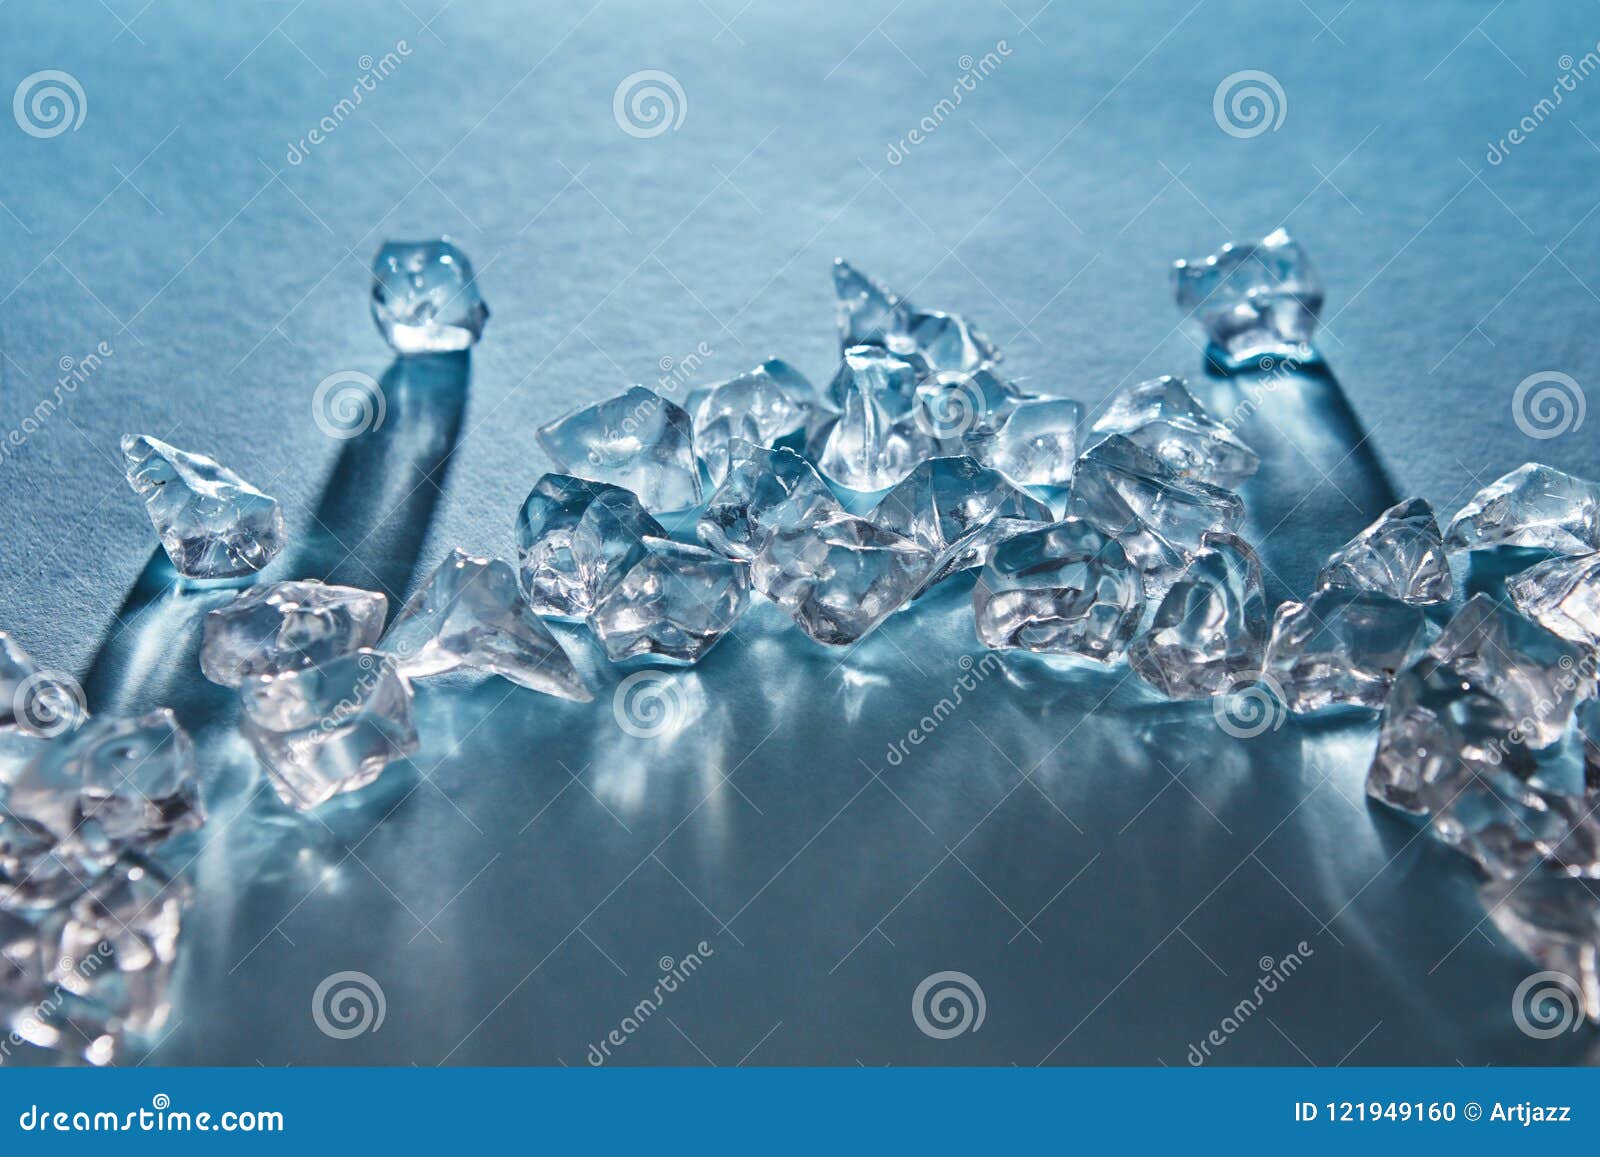 https://thumbs.dreamstime.com/z/pieces-crushed-ice-cubes-form-arc-long-shadows-reflections-surface-blue-long-shadows-121949160.jpg